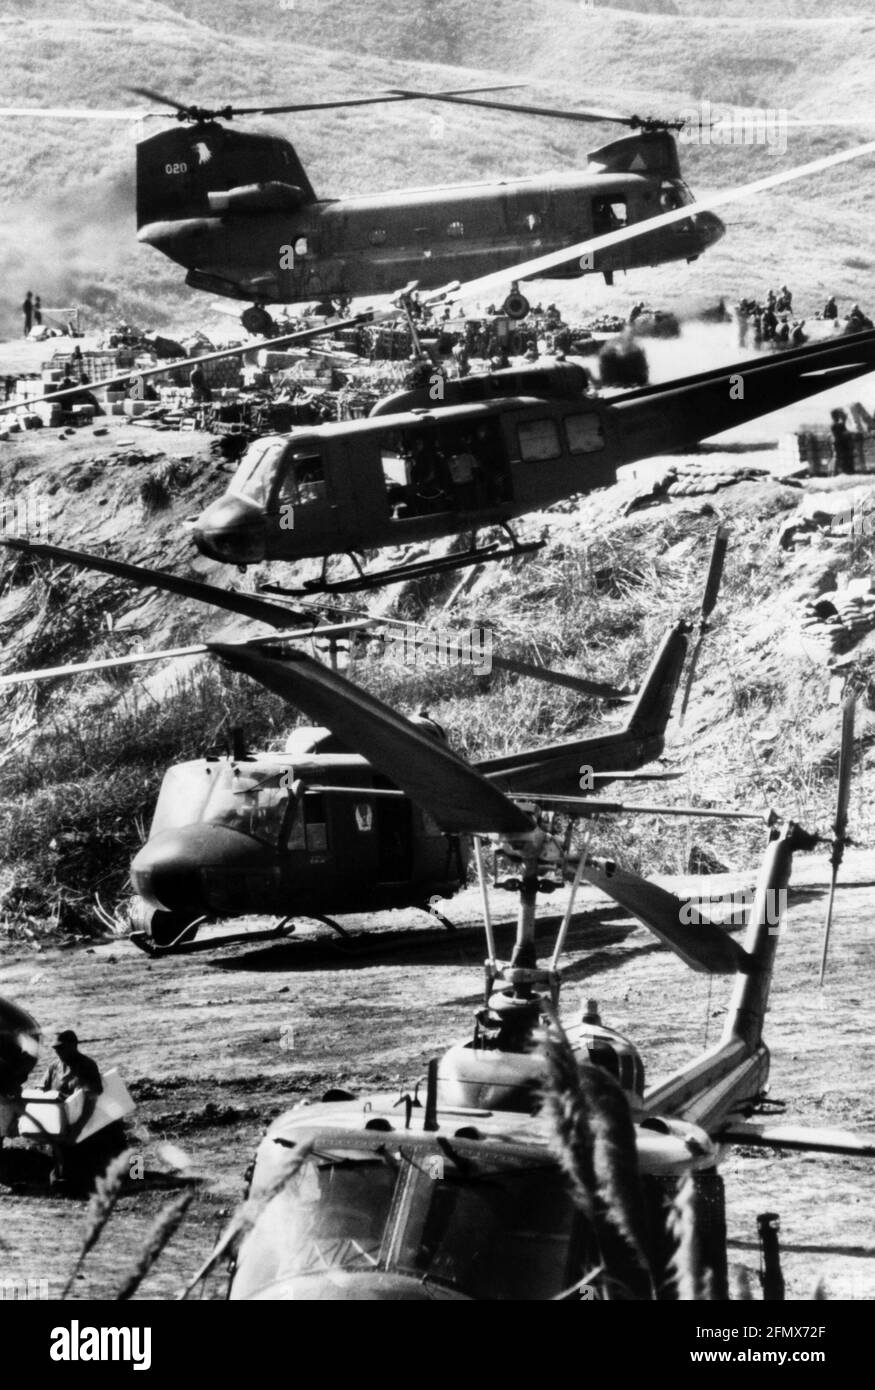 geography/travel, Asia, Vietnam, Viet Nam, War, US helicopter, Khe Sanh, South Vietnam, 1970, ADDITIONAL-RIGHTS-CLEARANCE-INFO-NOT-AVAILABLE Stock Photo